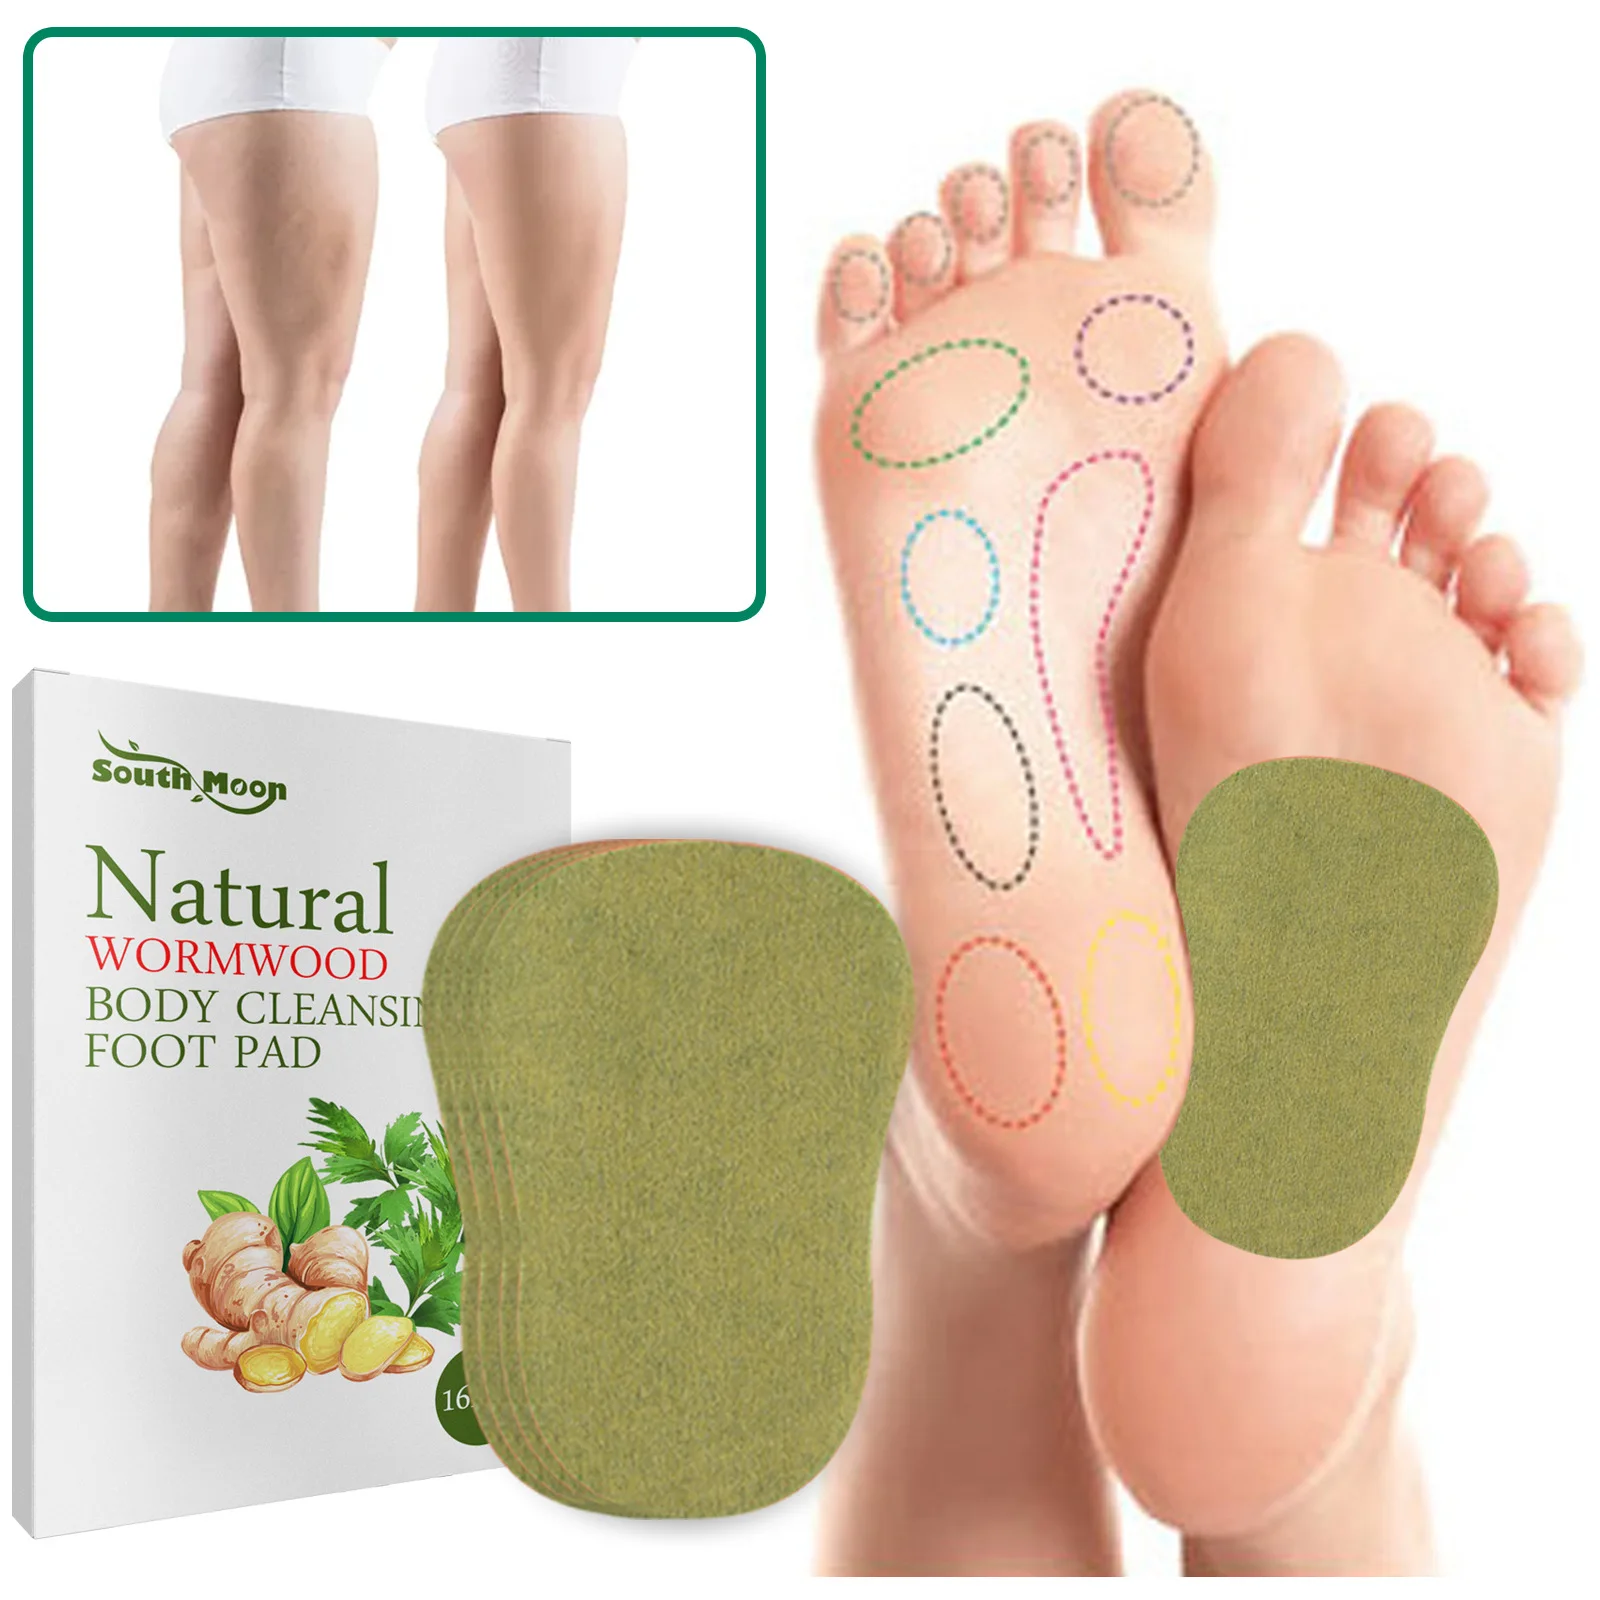 Ginger Body Shaping Detox Foot Patch Wormwood Cleanse Relieve Physical Stress Help Sleep Detox Foot Patch